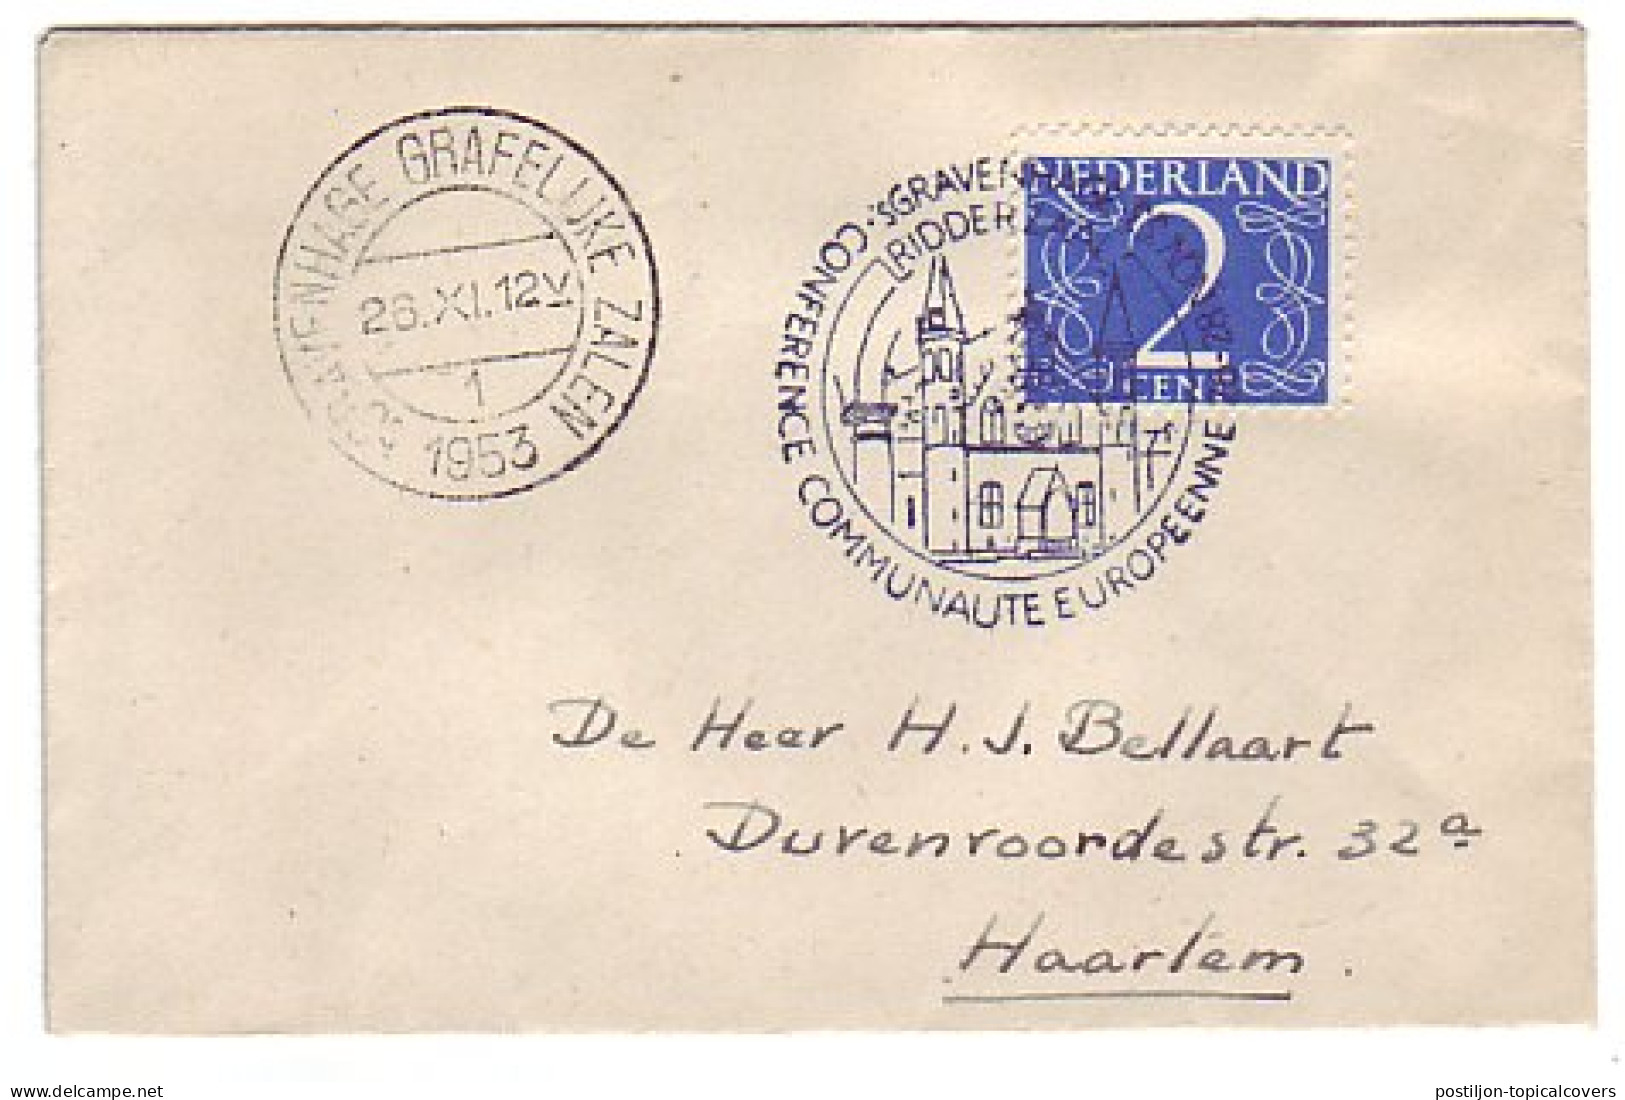 Cover / Postmark Netherlands 1953 European Conference The Hague - European Community